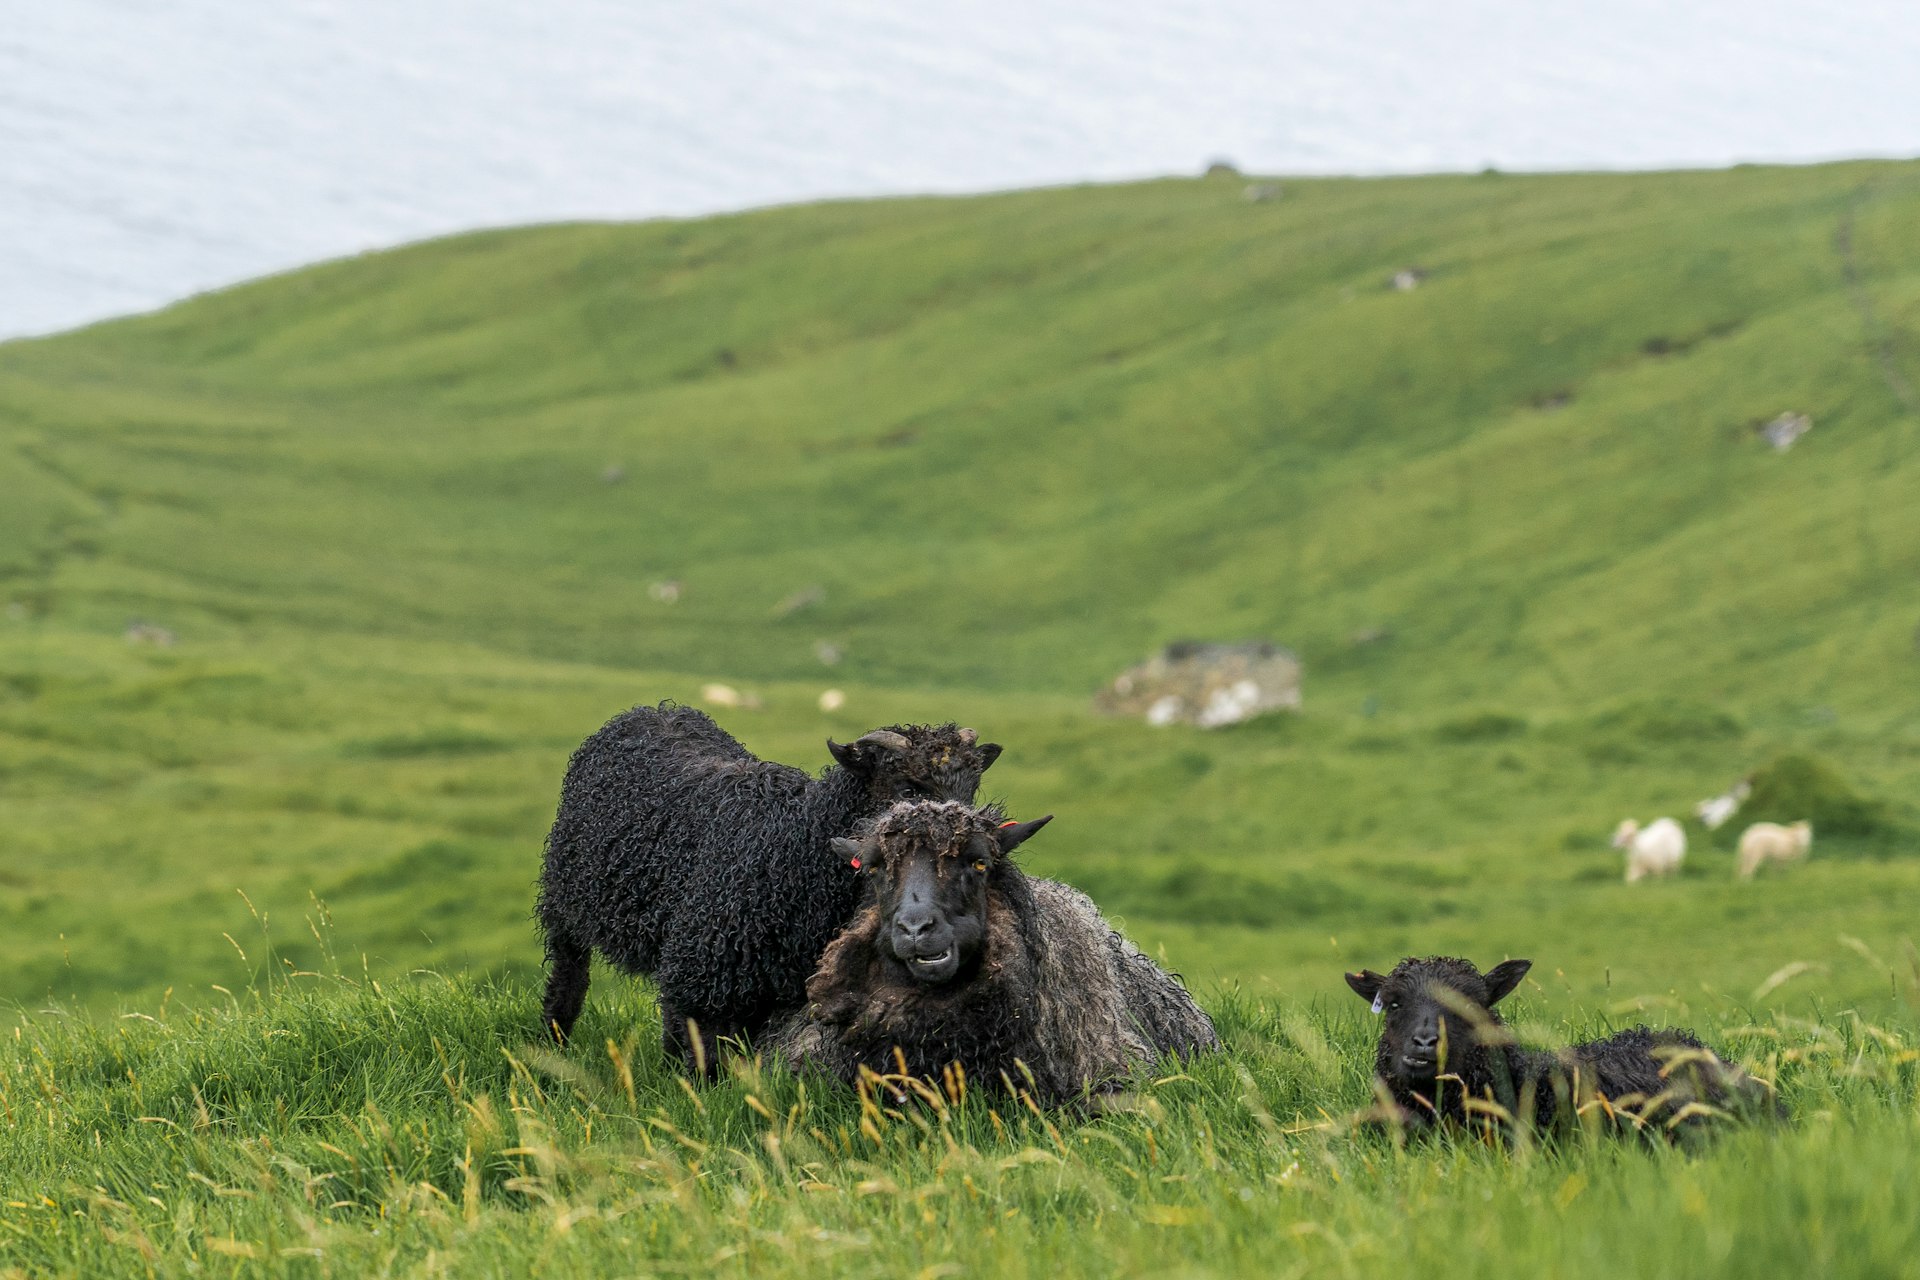 Black sheep of the islands